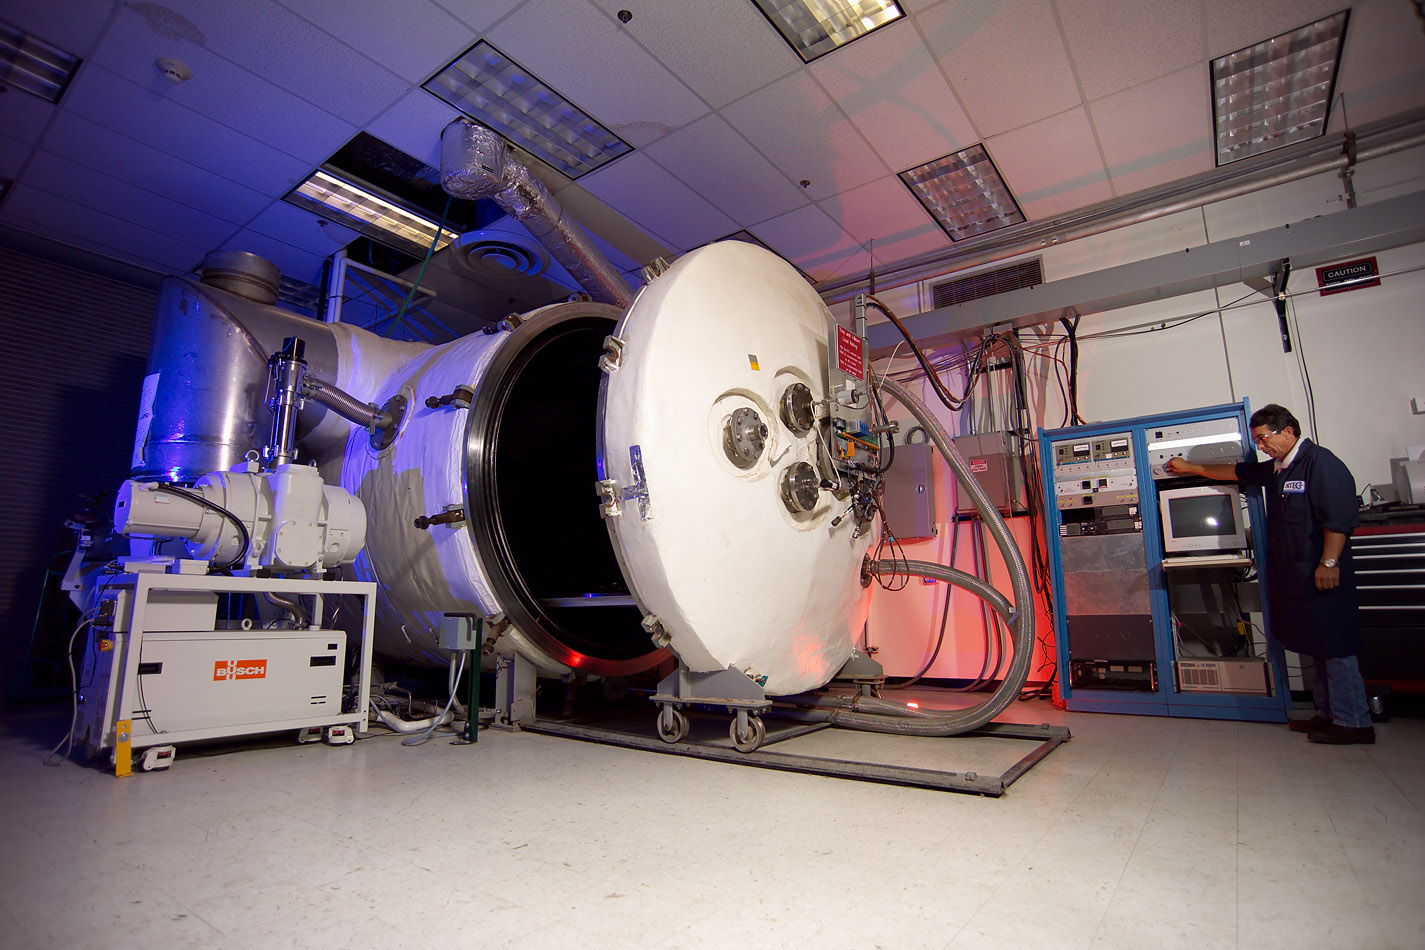 COPV testing can be carried out in any of the cryogenic, thermal conditioned, or vacuum chambers at White Sands Test Facility.